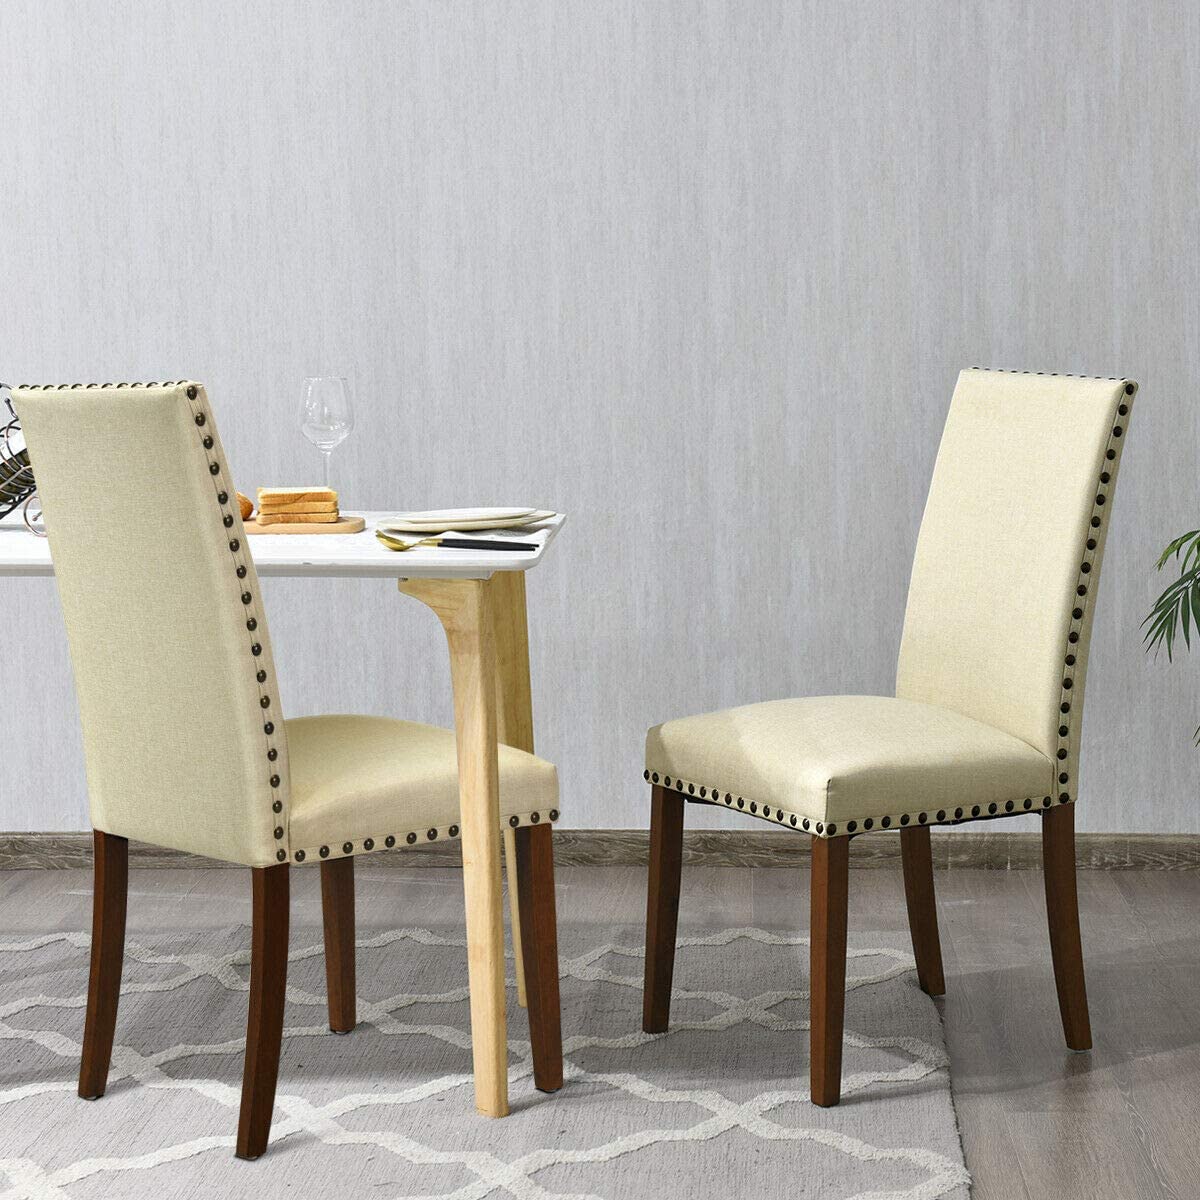 B08HX7D738 Elegant Beige Fabric Wooden Legs Parsons Dining Chairs with Nailhead Trim Set of 2 for Kitchen and Dining Room, Classic Home Accent Furniture